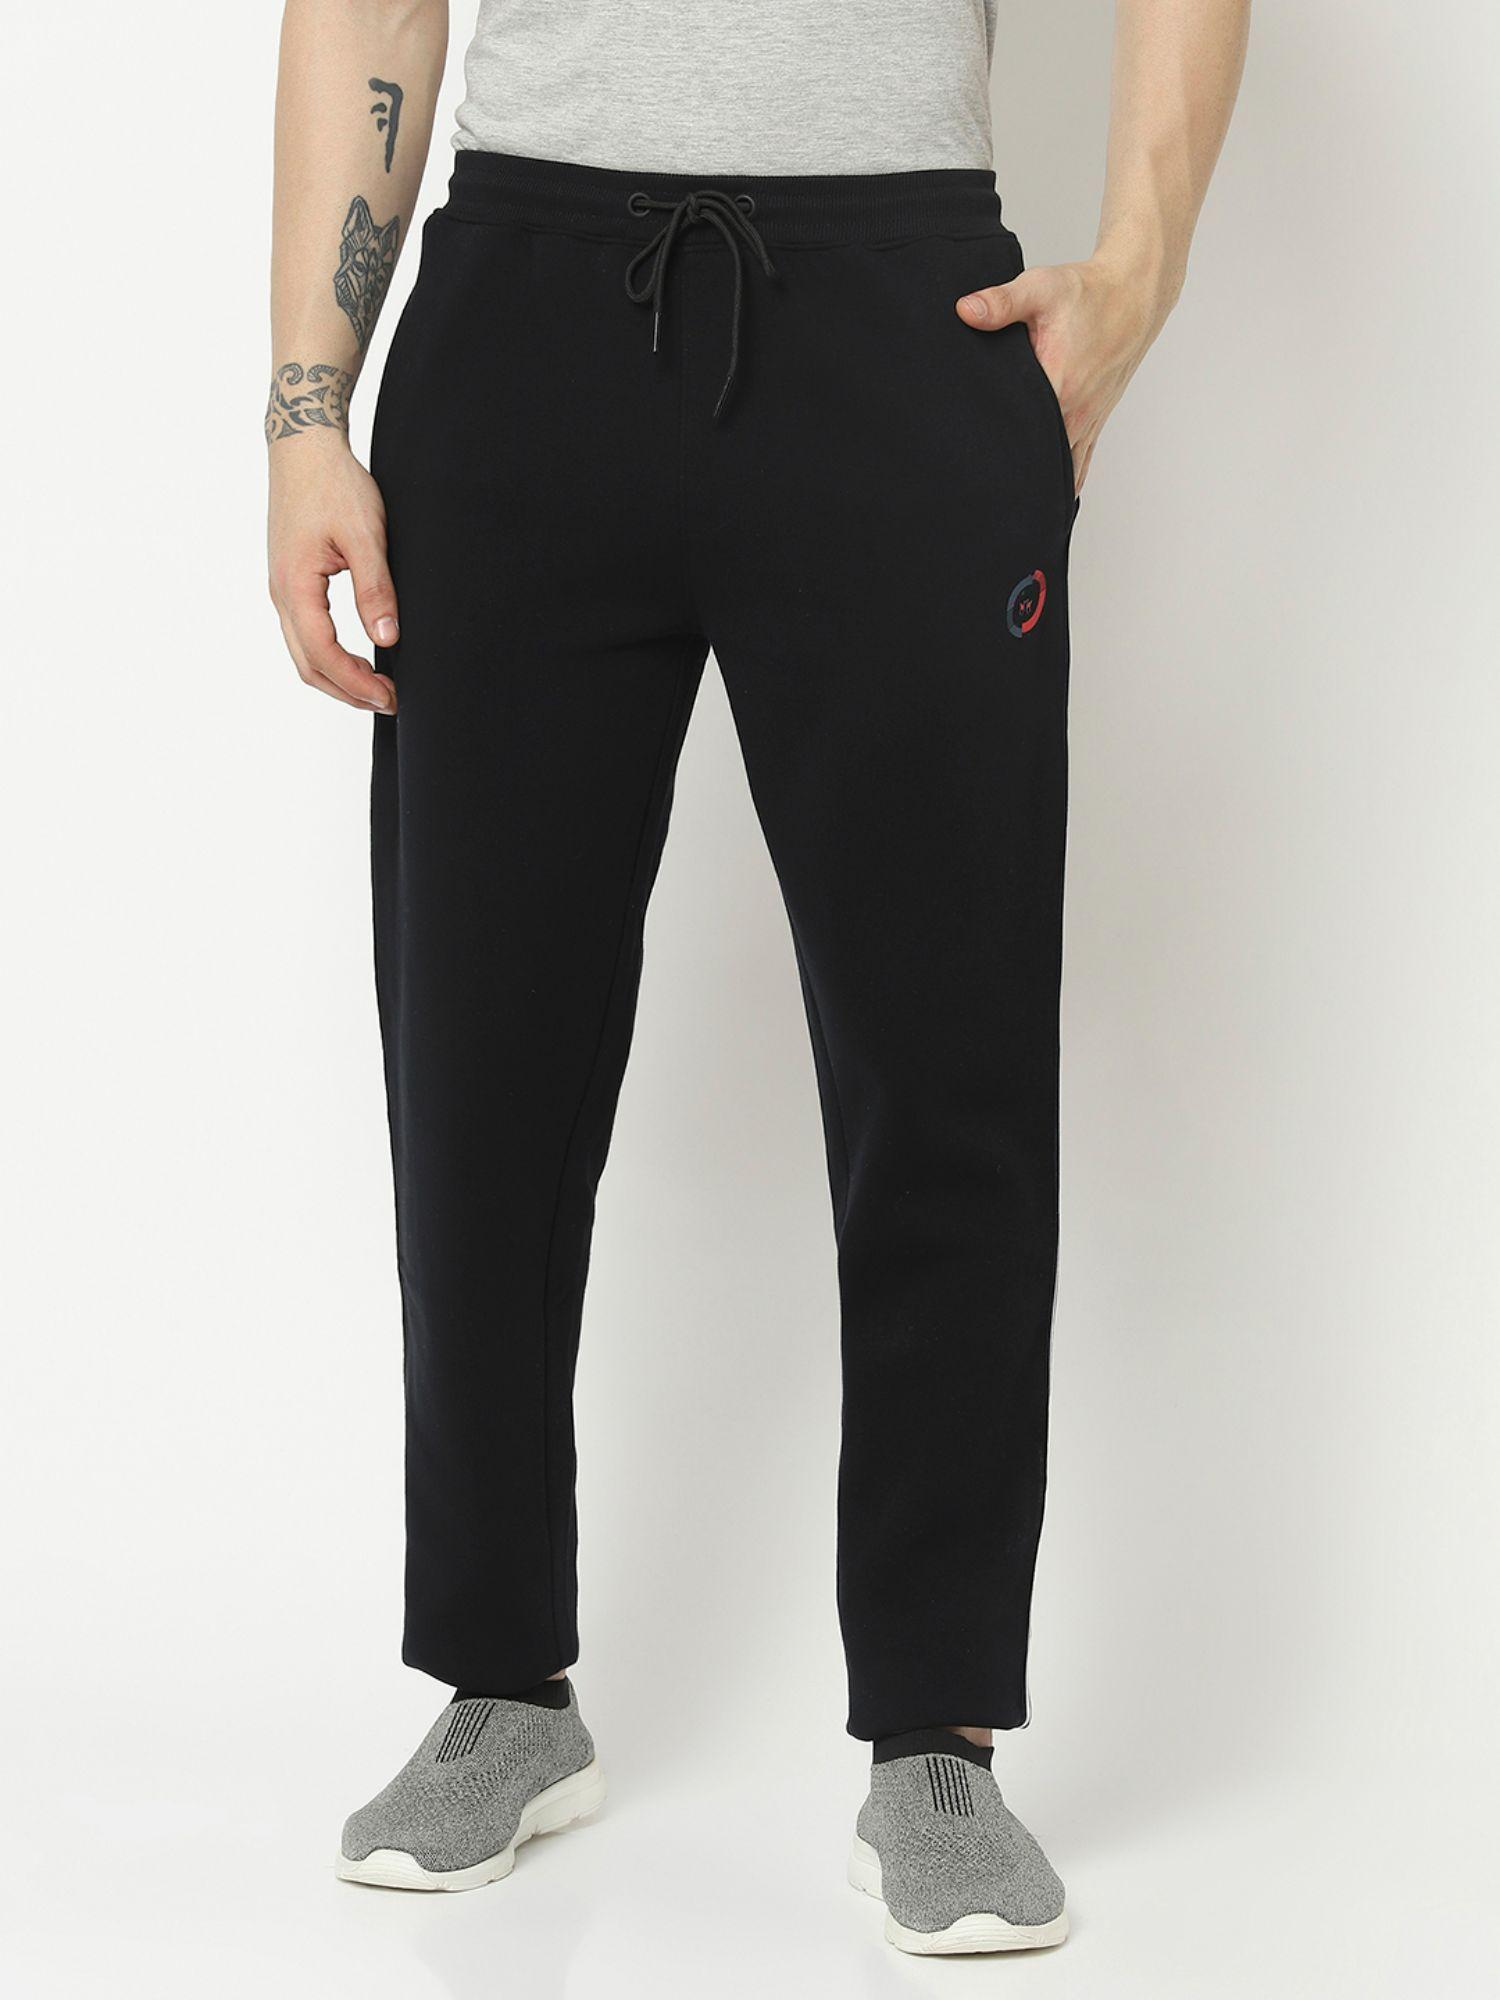 men-navy-blue-track-pant-with-contrast-logo-work